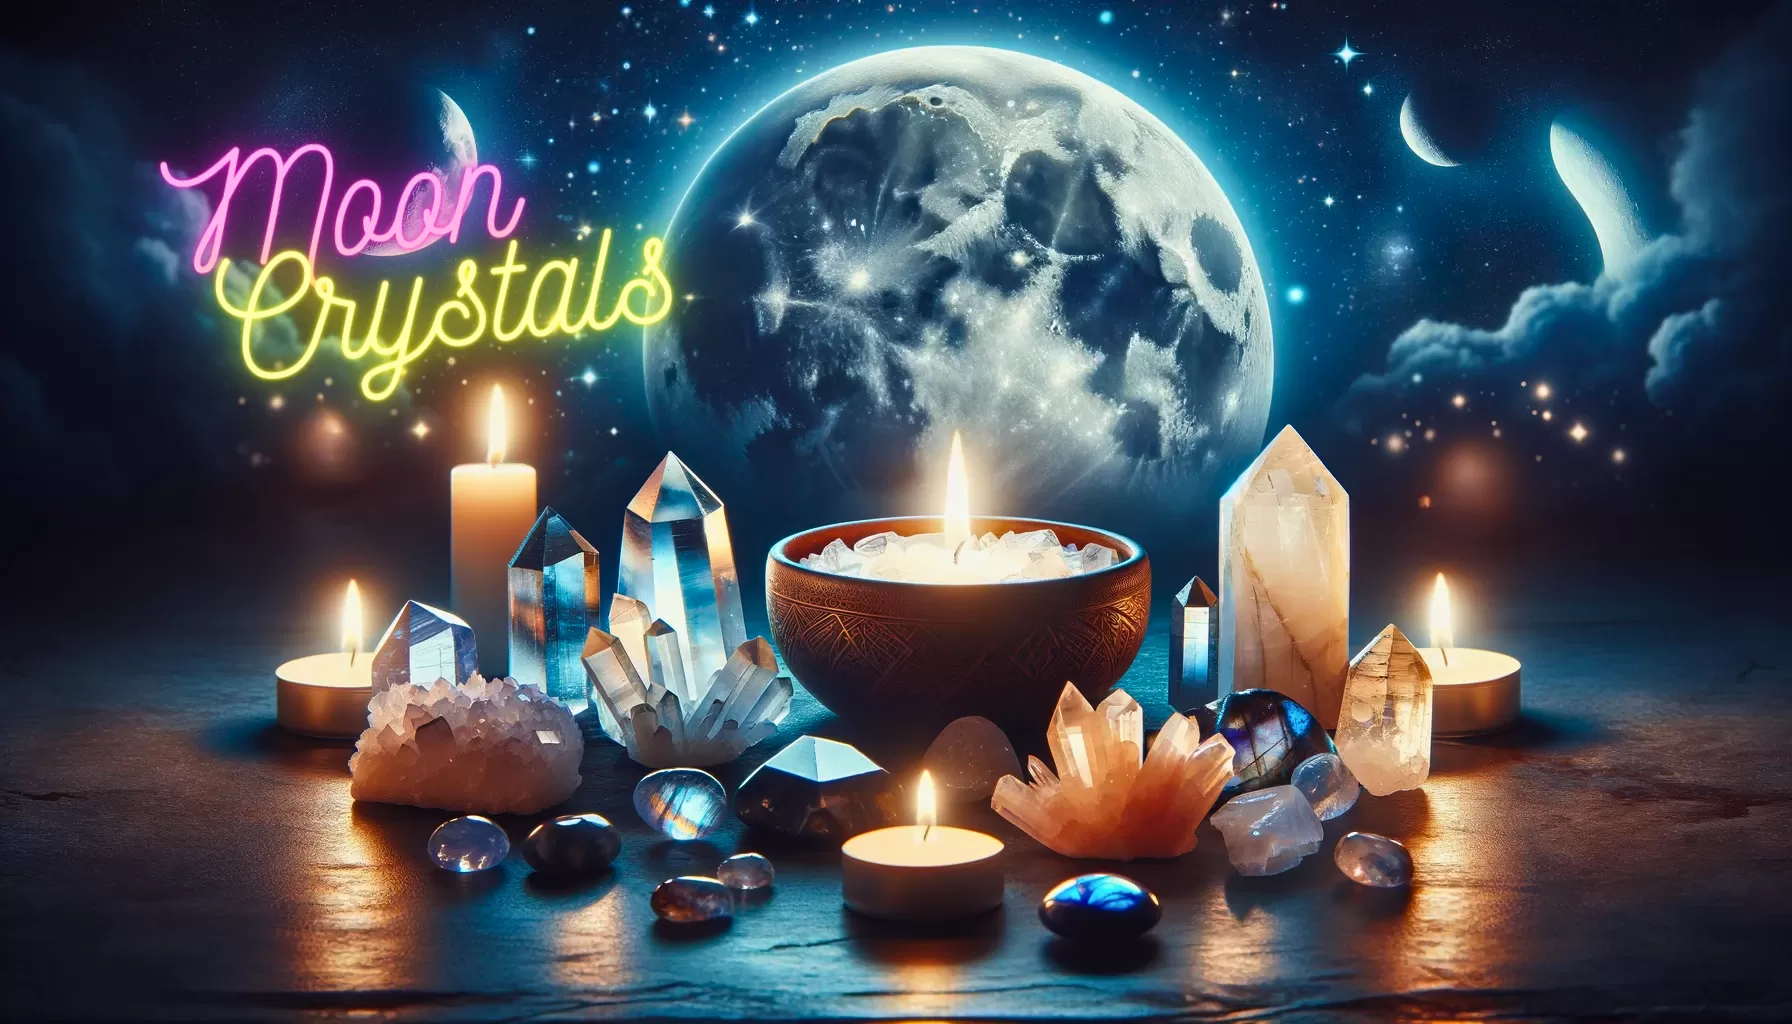 Moon Crystals like Moonstone, Selenite, and Labradorite Illuminated by Moonlight in a Playful, Night-time Scene